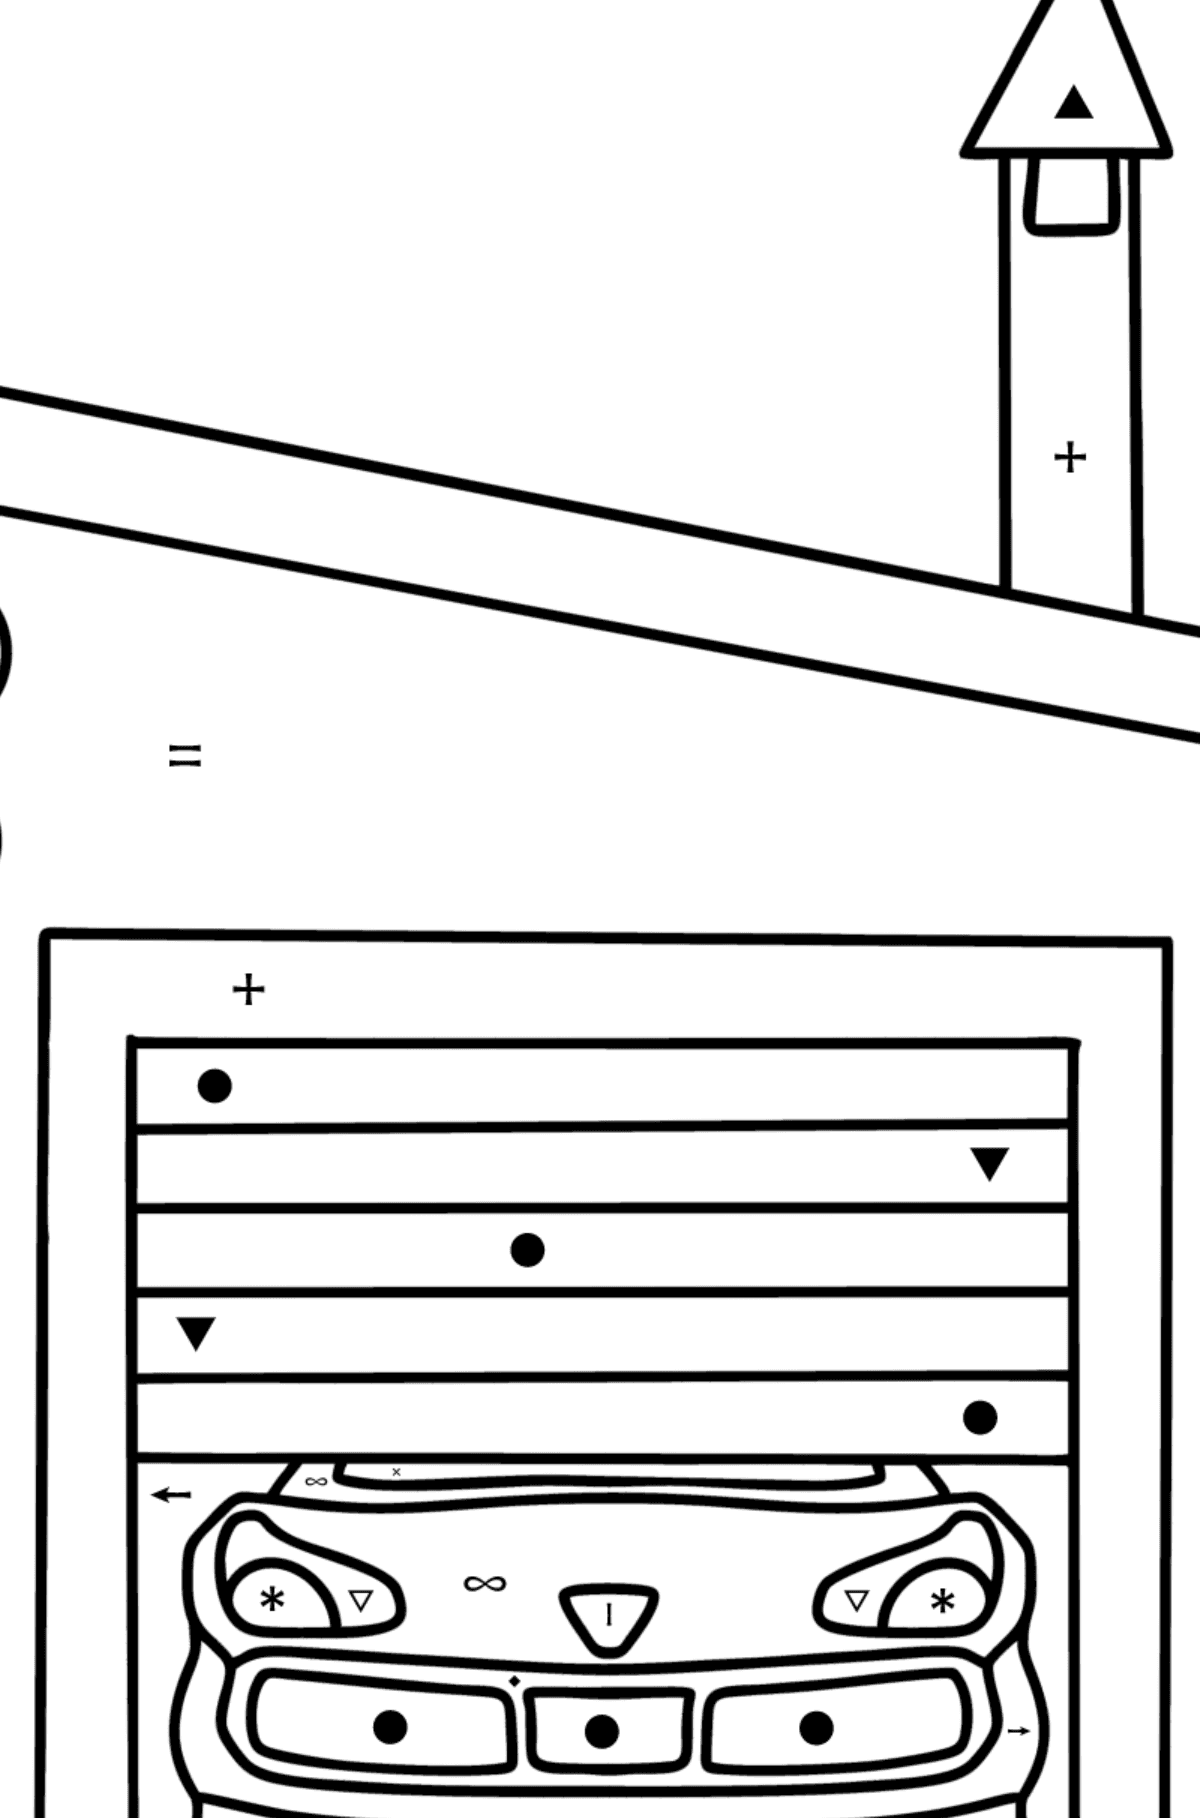 Garage coloring page - Coloring by Symbols for Kids